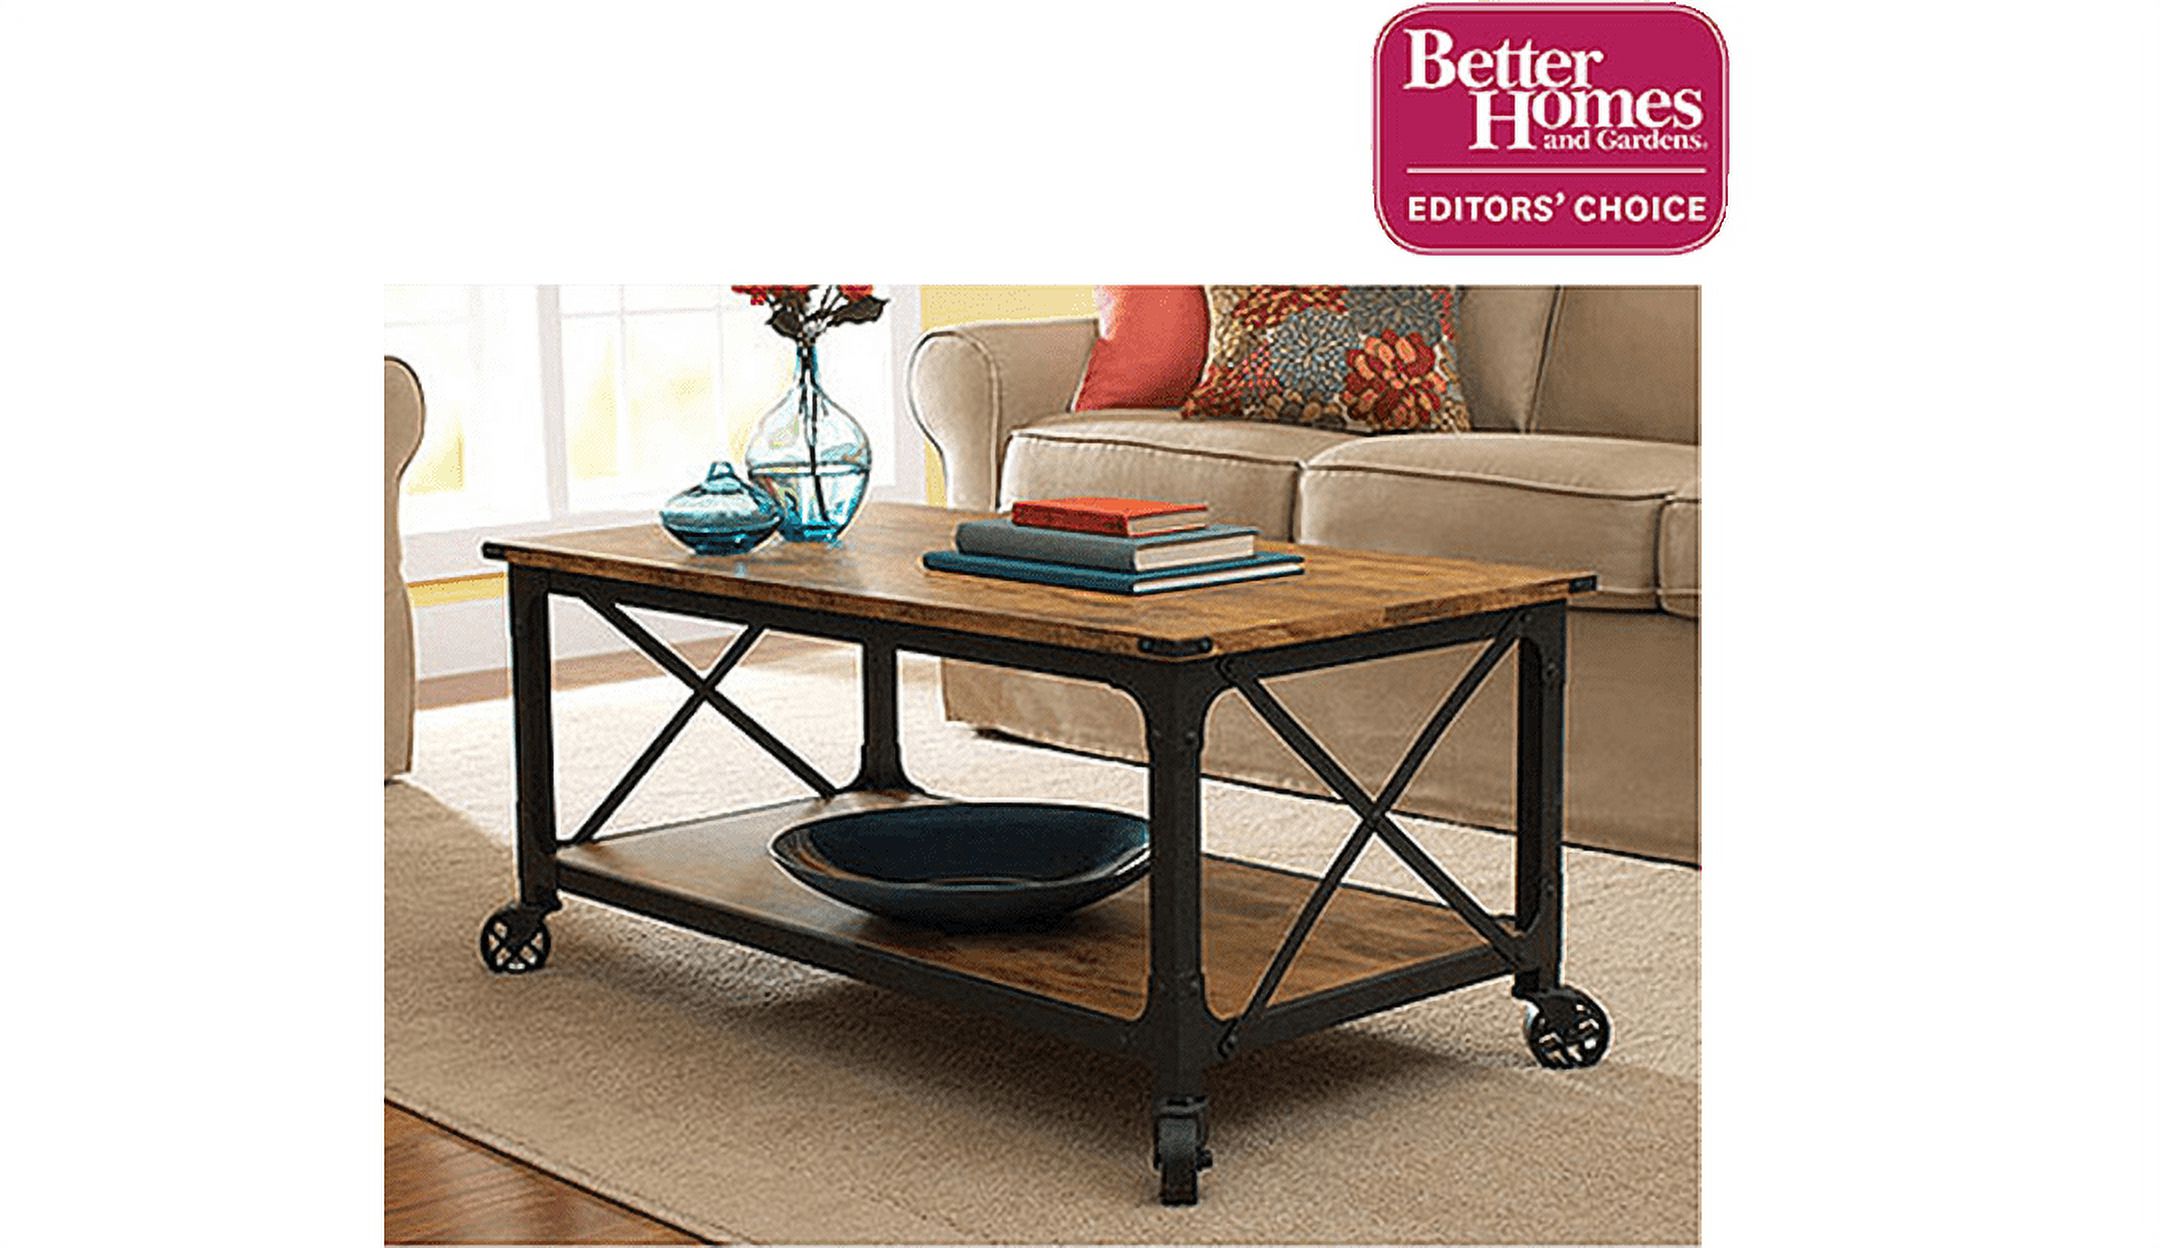 Better Homes & Gardens Rustic Country Coffee Table, Weathered Pine Finish - image 2 of 8